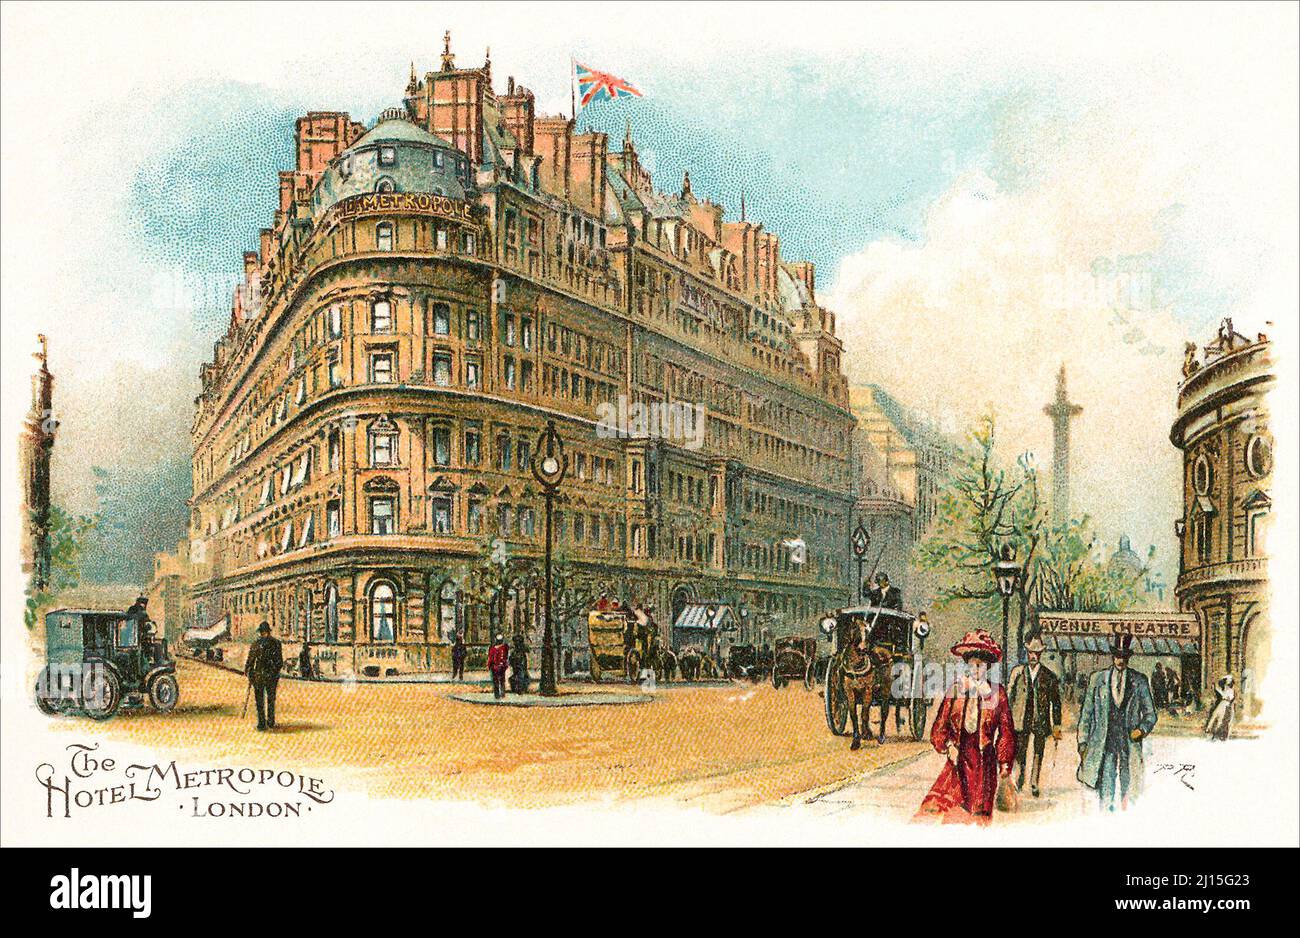 Vintage Edwardian era postcard of the Hotel Metropole, London, England. The Hotel Metropole was on the corner of Northumberland Avenue and Whitehall Place. It is now the Corinthia Hotel. Stock Photo